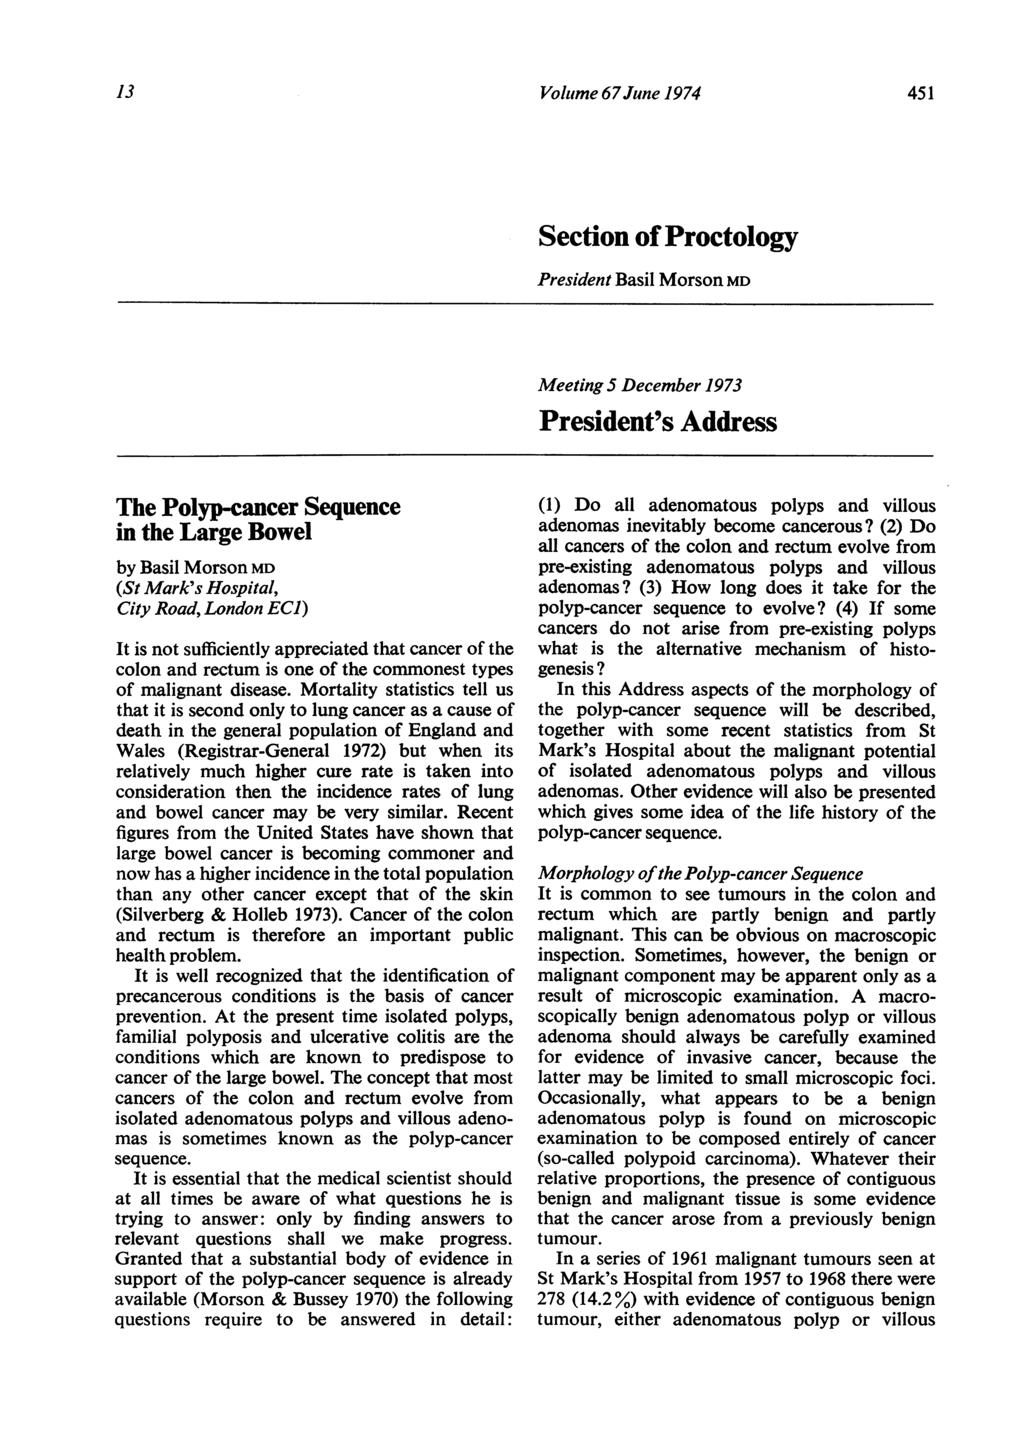 13 Voluime 67June 1974 451 Section of Proctology President Basil Morson MD Meeting 5 December 1973 President's Address The Polyp-cancer Sequence in the Large Bowel by Basil Morson MD (St Mark's